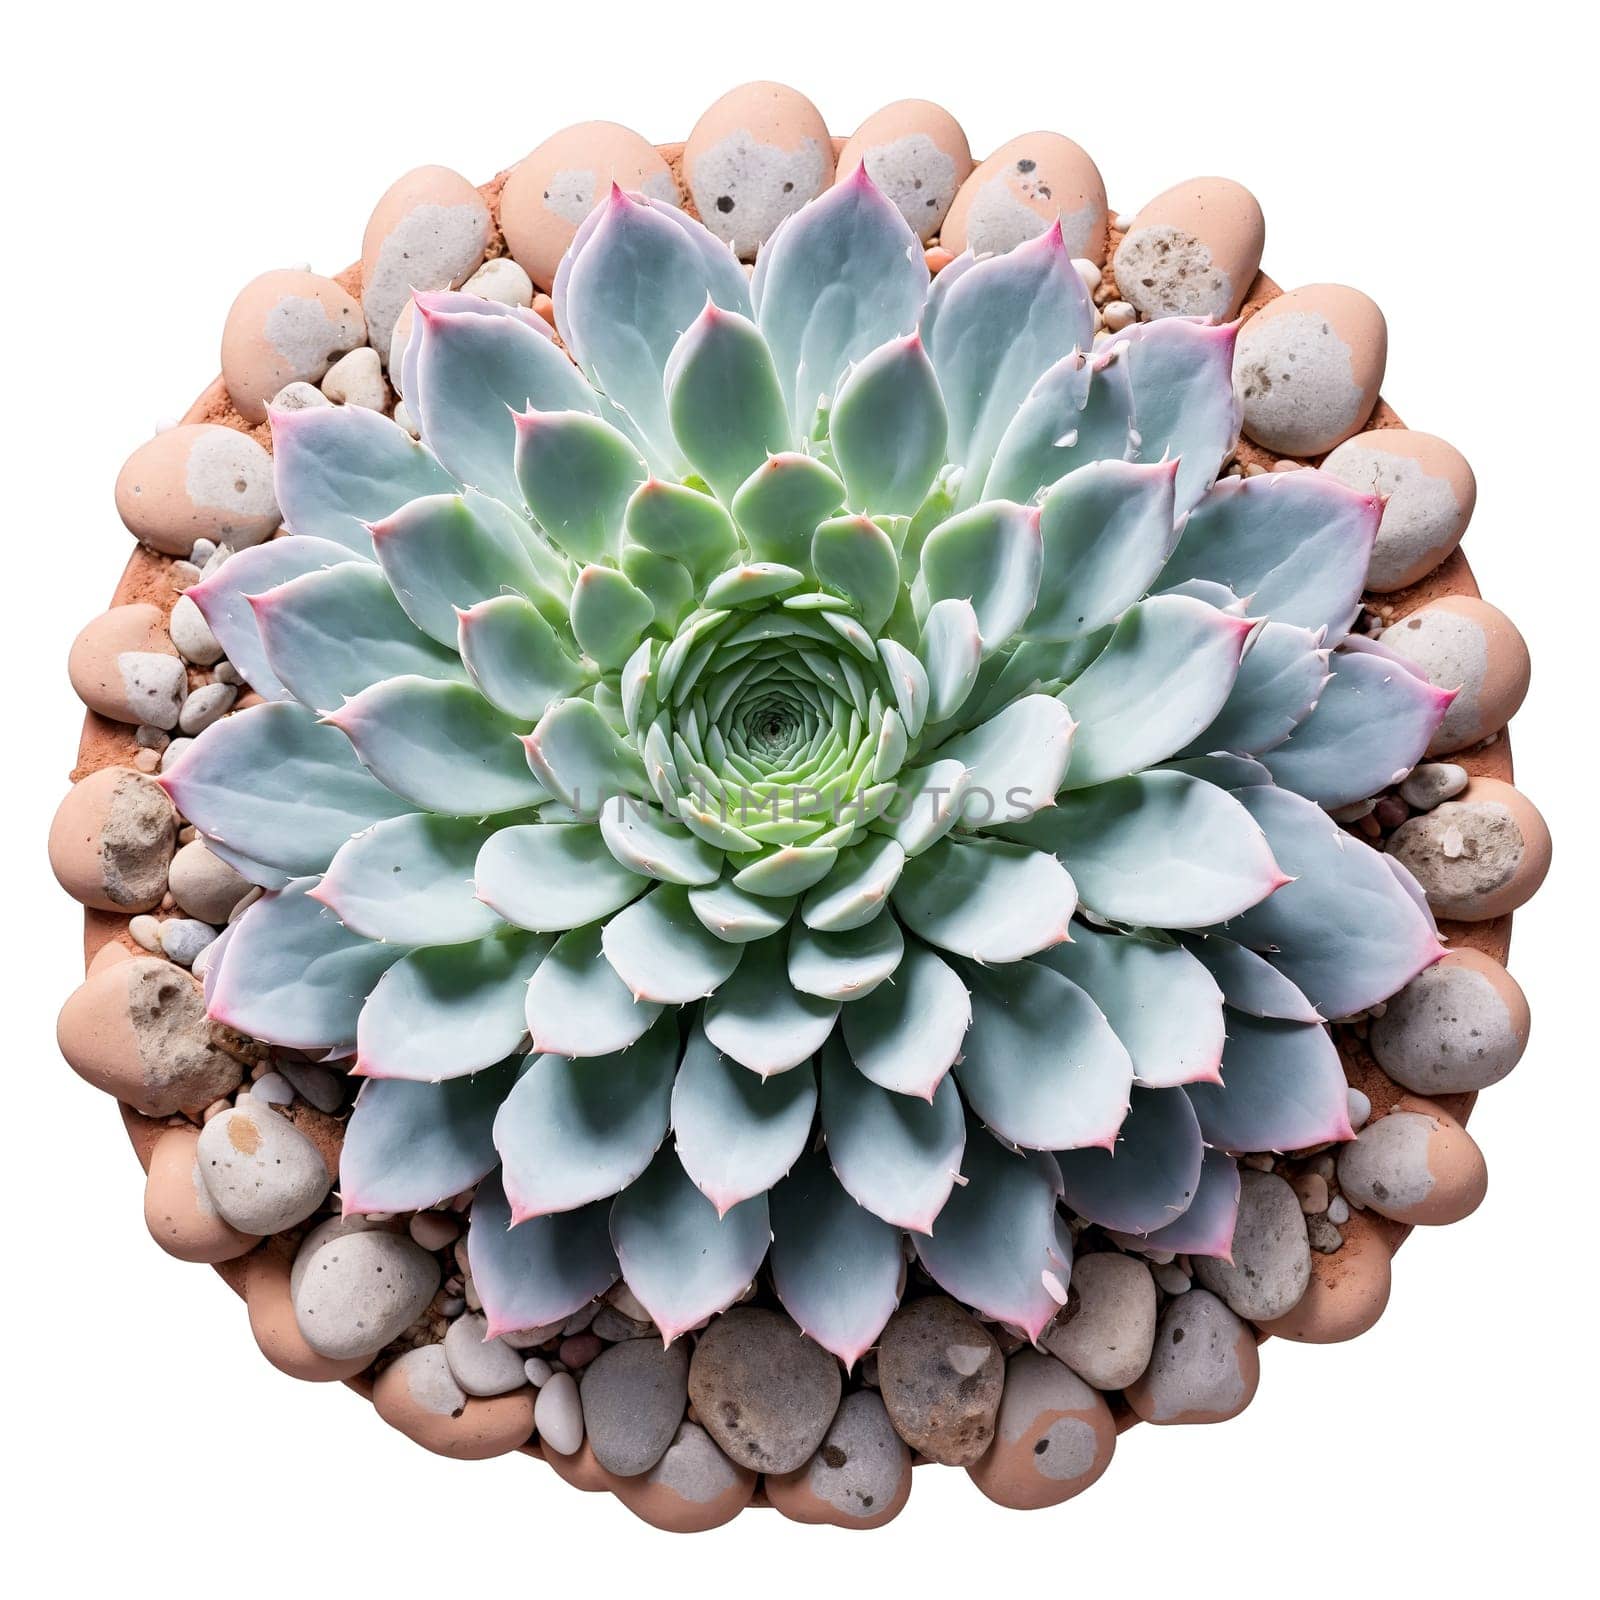 Echeveria Elegans rosette of pale green and pink succulent leaves in a terracotta pot with. Plants isolated on transparent background.